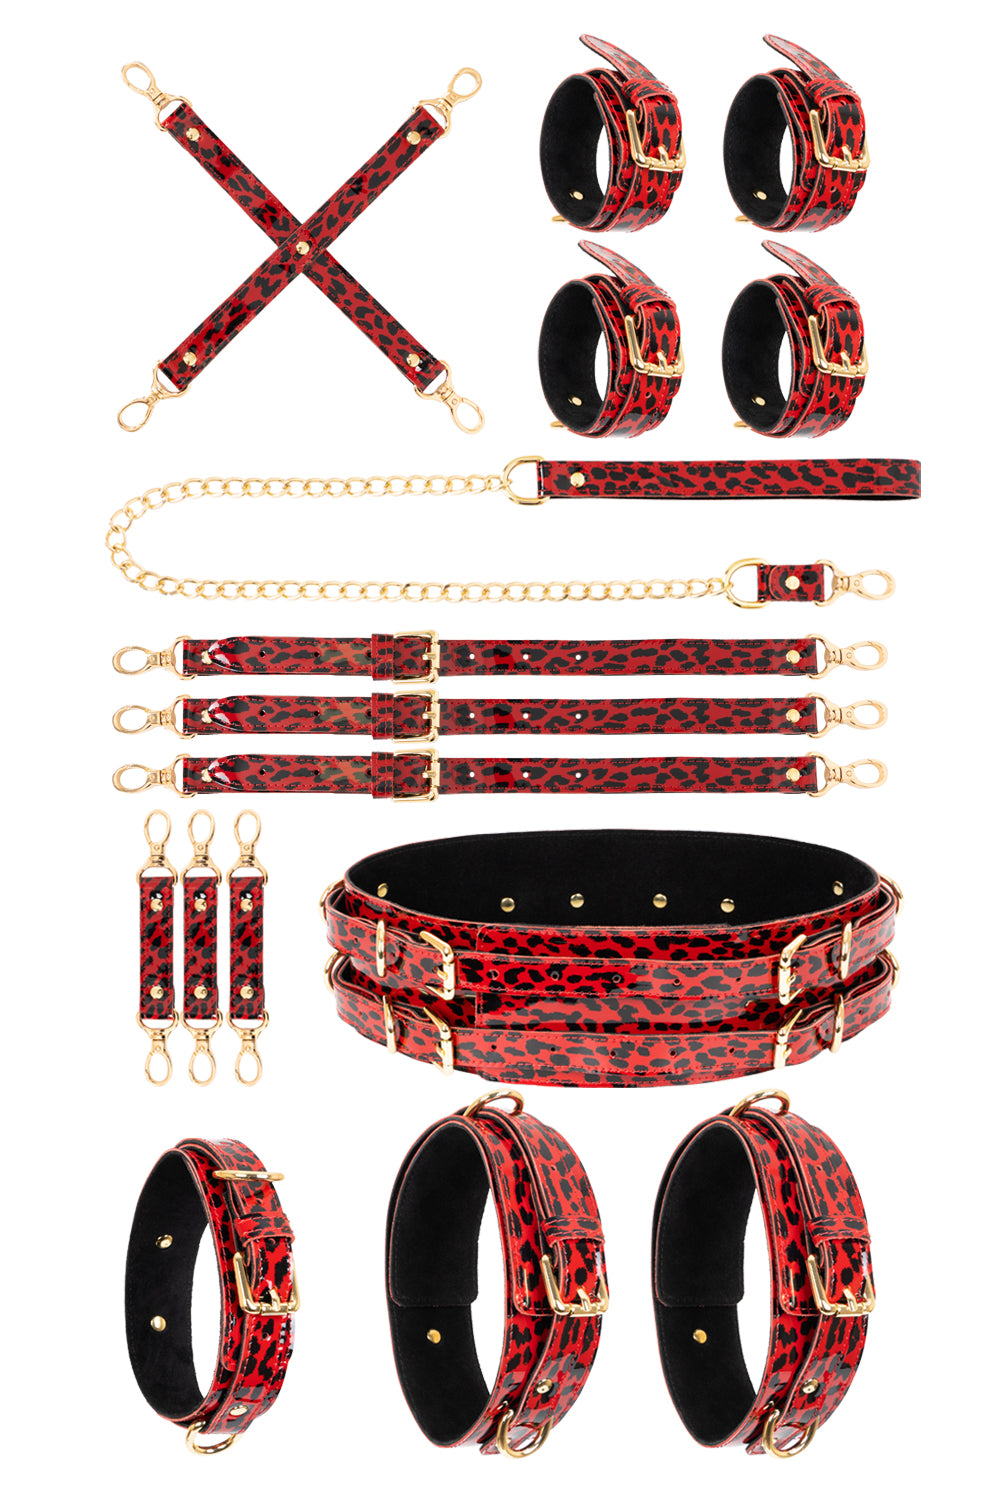 Lacquered leather FULL Set with chain leash. Leopard